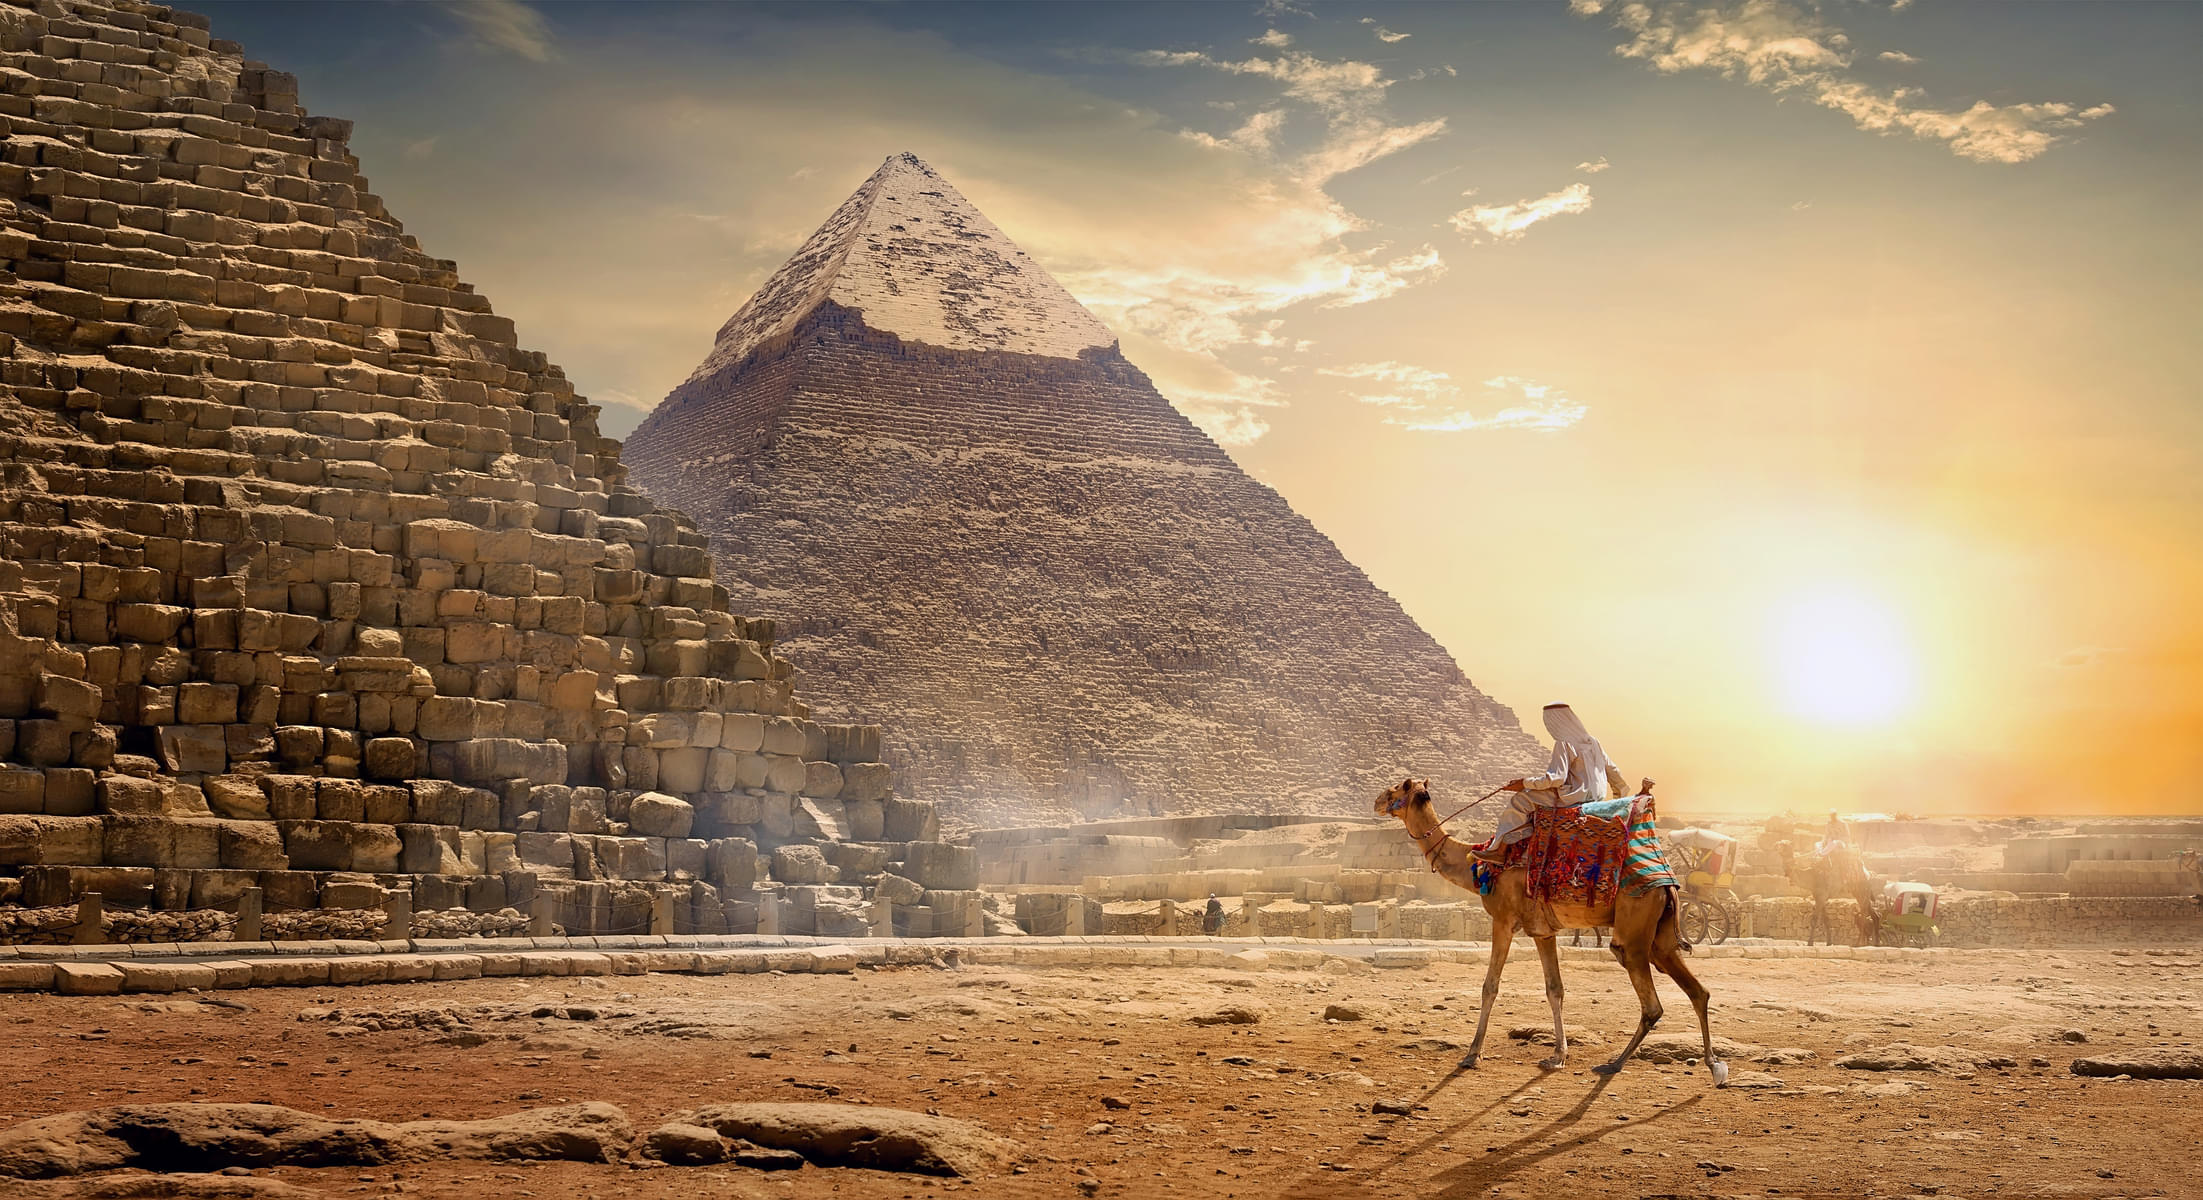 Know Before You Go Pyramid of Giza